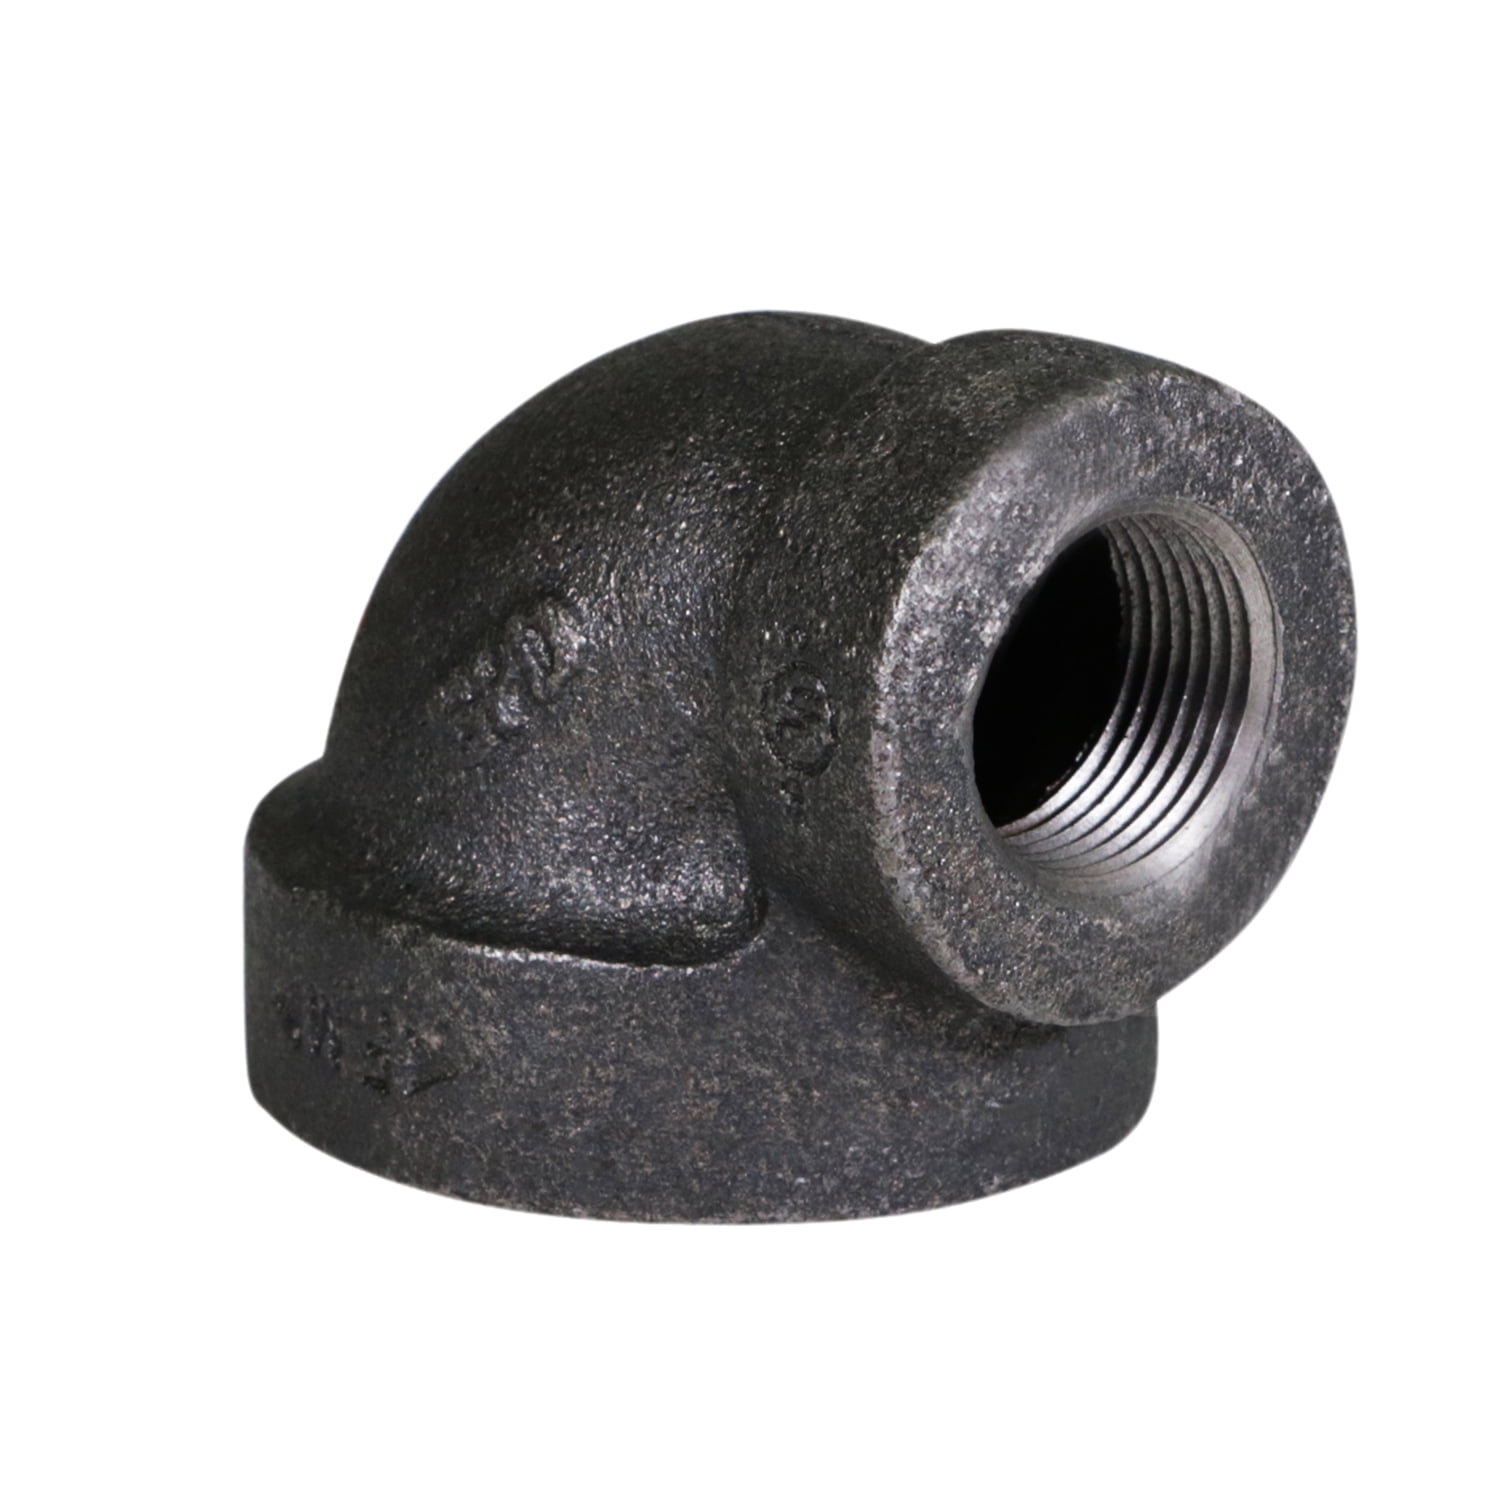 Plug Black Malleable Iron Pipe Fitting BSP 1/2" & 3/4" 